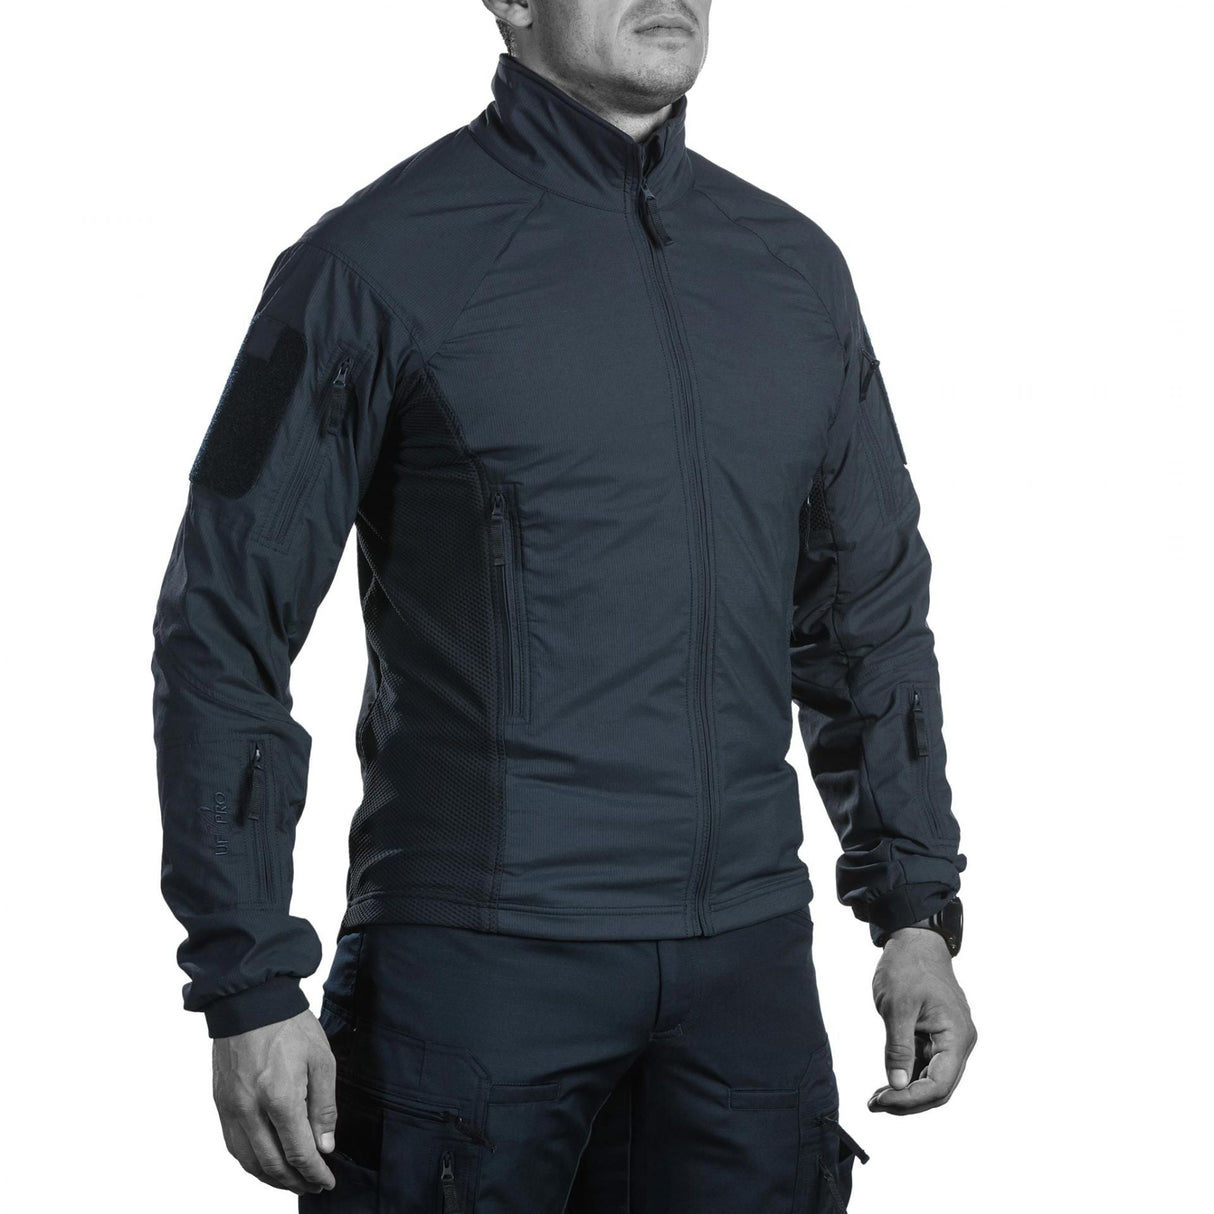 Tactical Softshell: Reliable Protection in Any Weather.